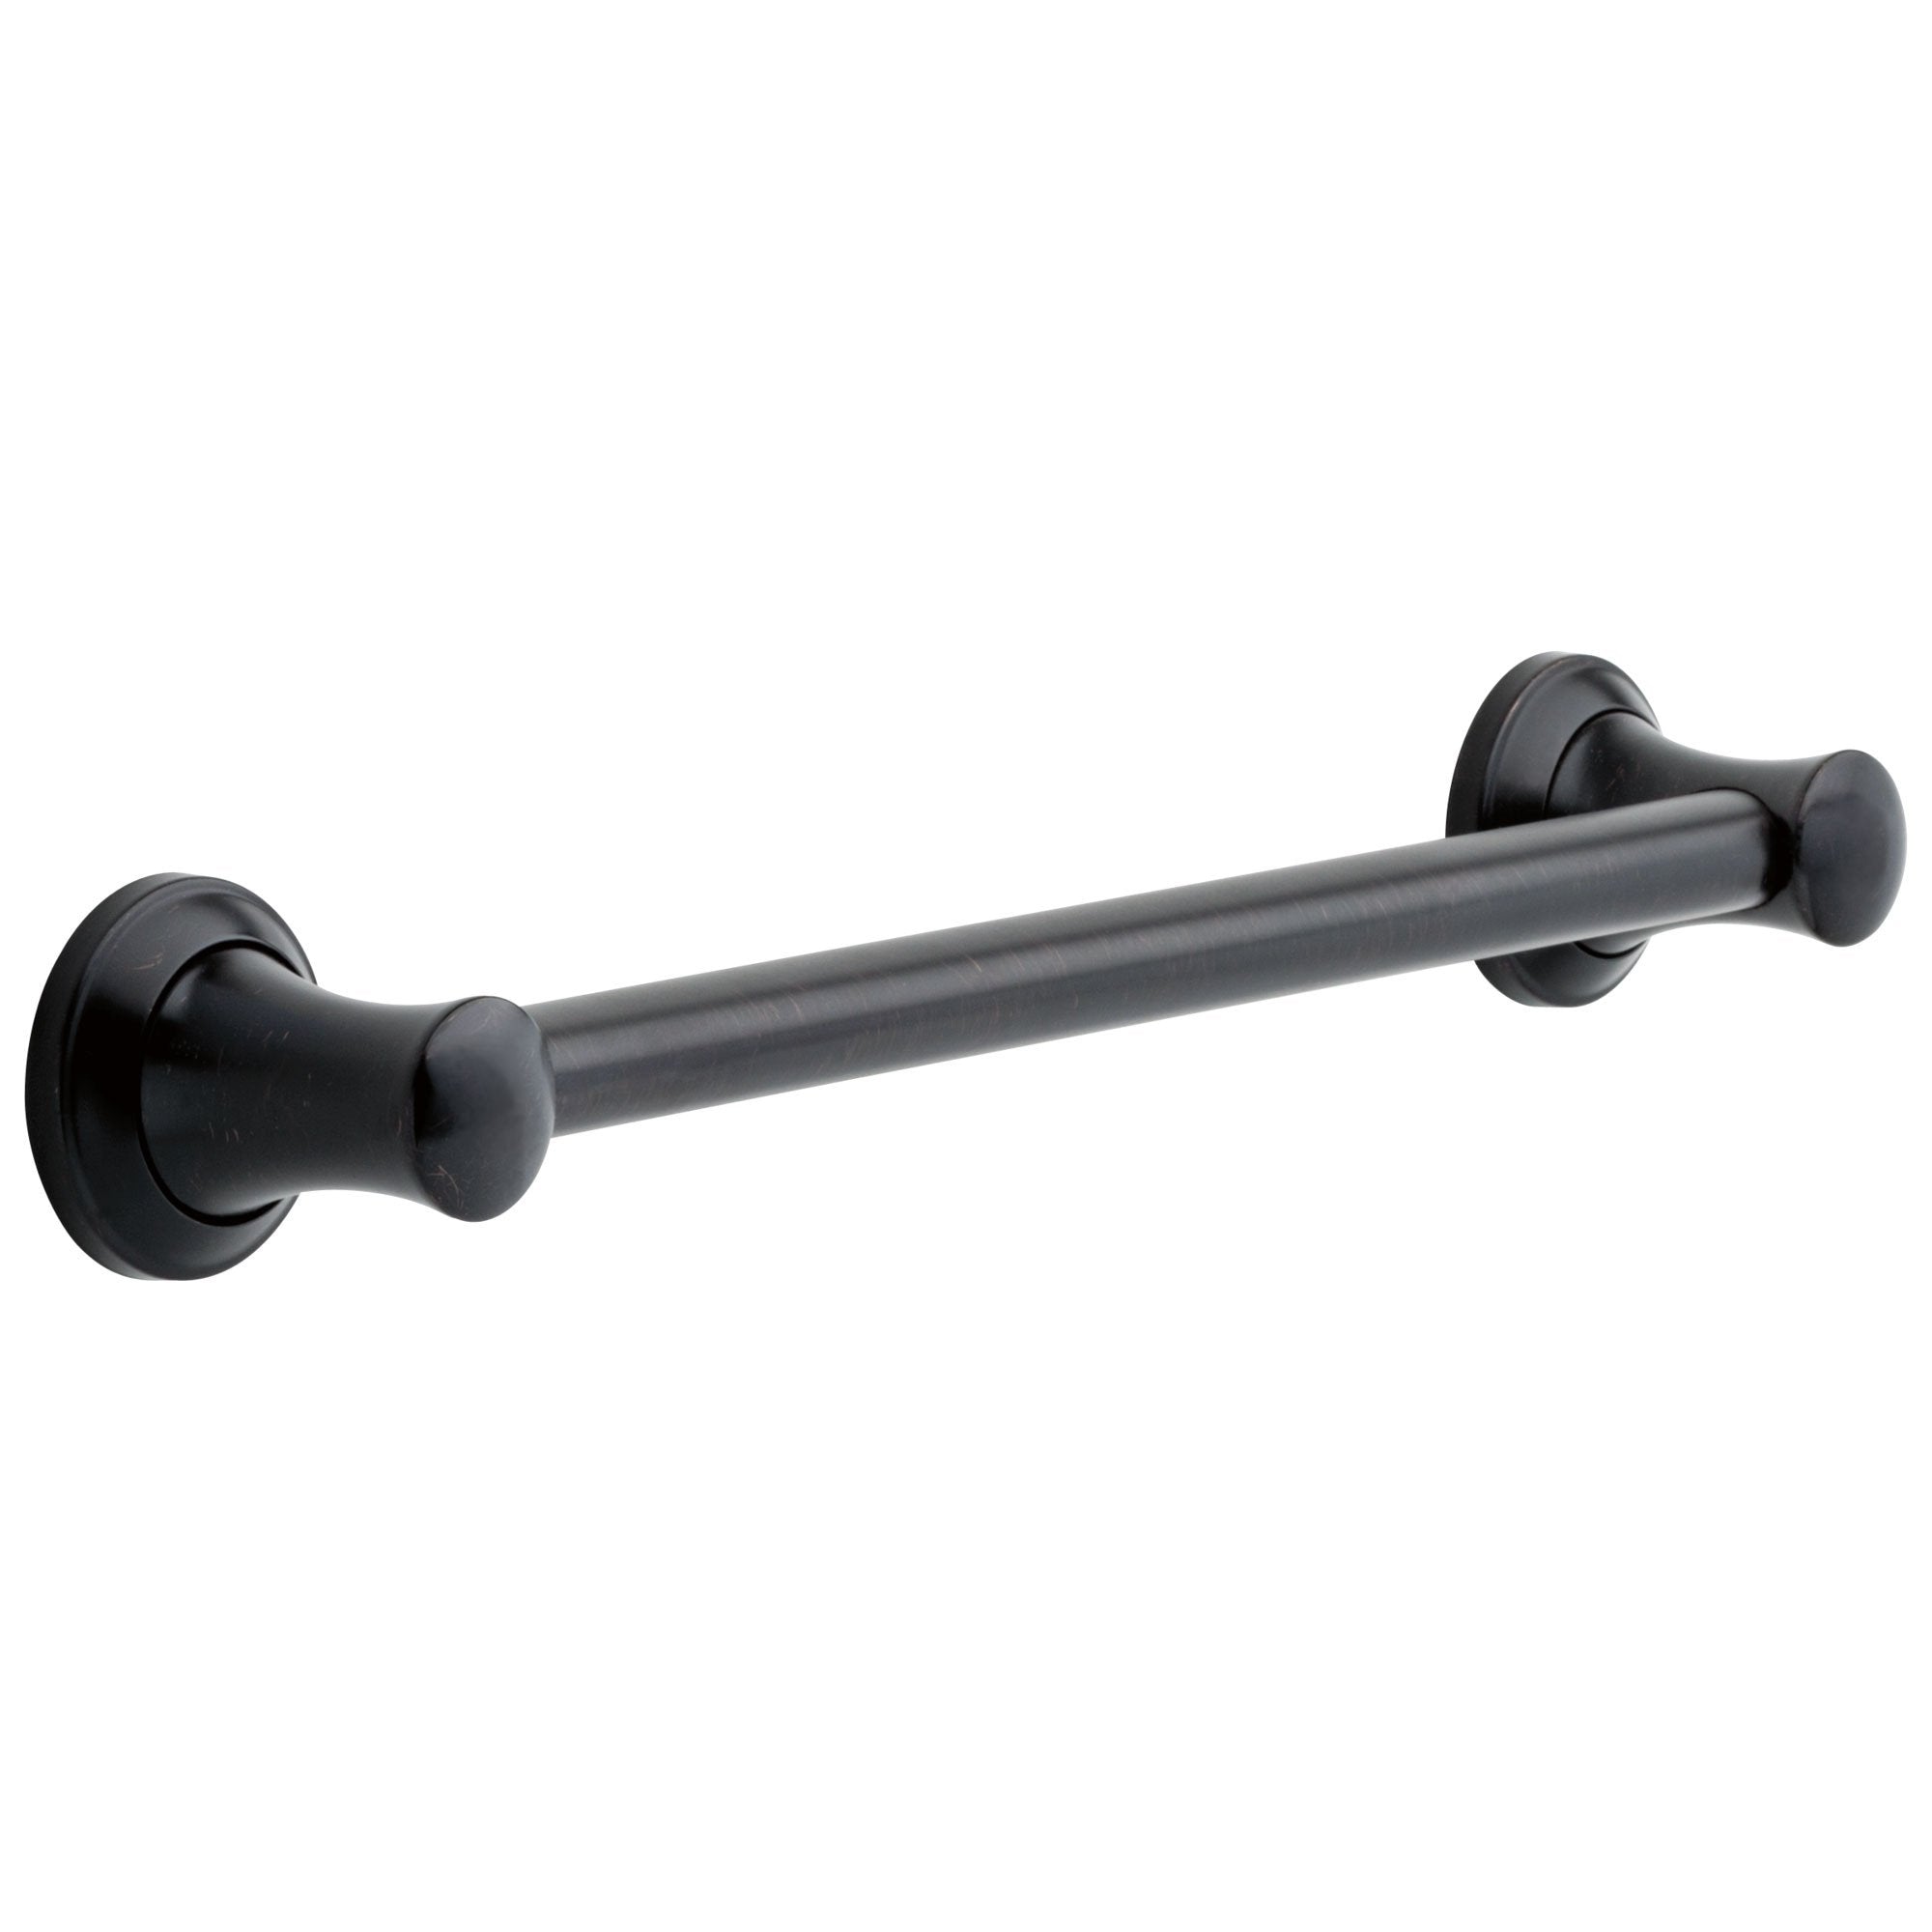 Delta Bath Safety Collection Venetian Bronze Finish Transitional Style Decorative ADA Approved 18-inch Grab Bar for Bathroom or Shower D41718RB